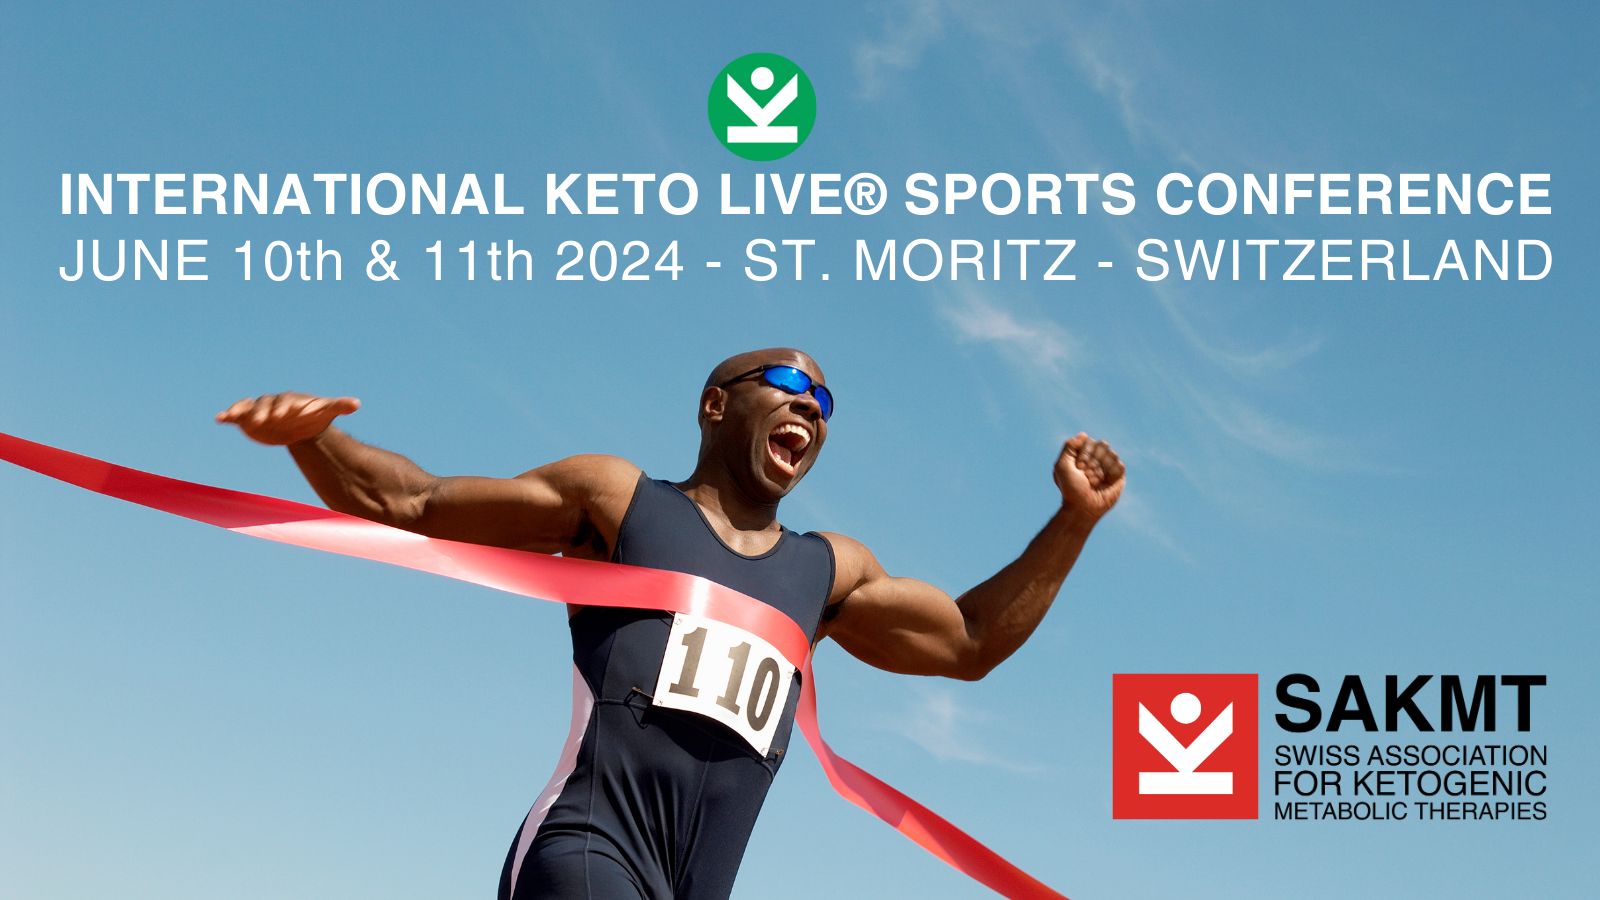 Event Keto Live Sports Conference 2024